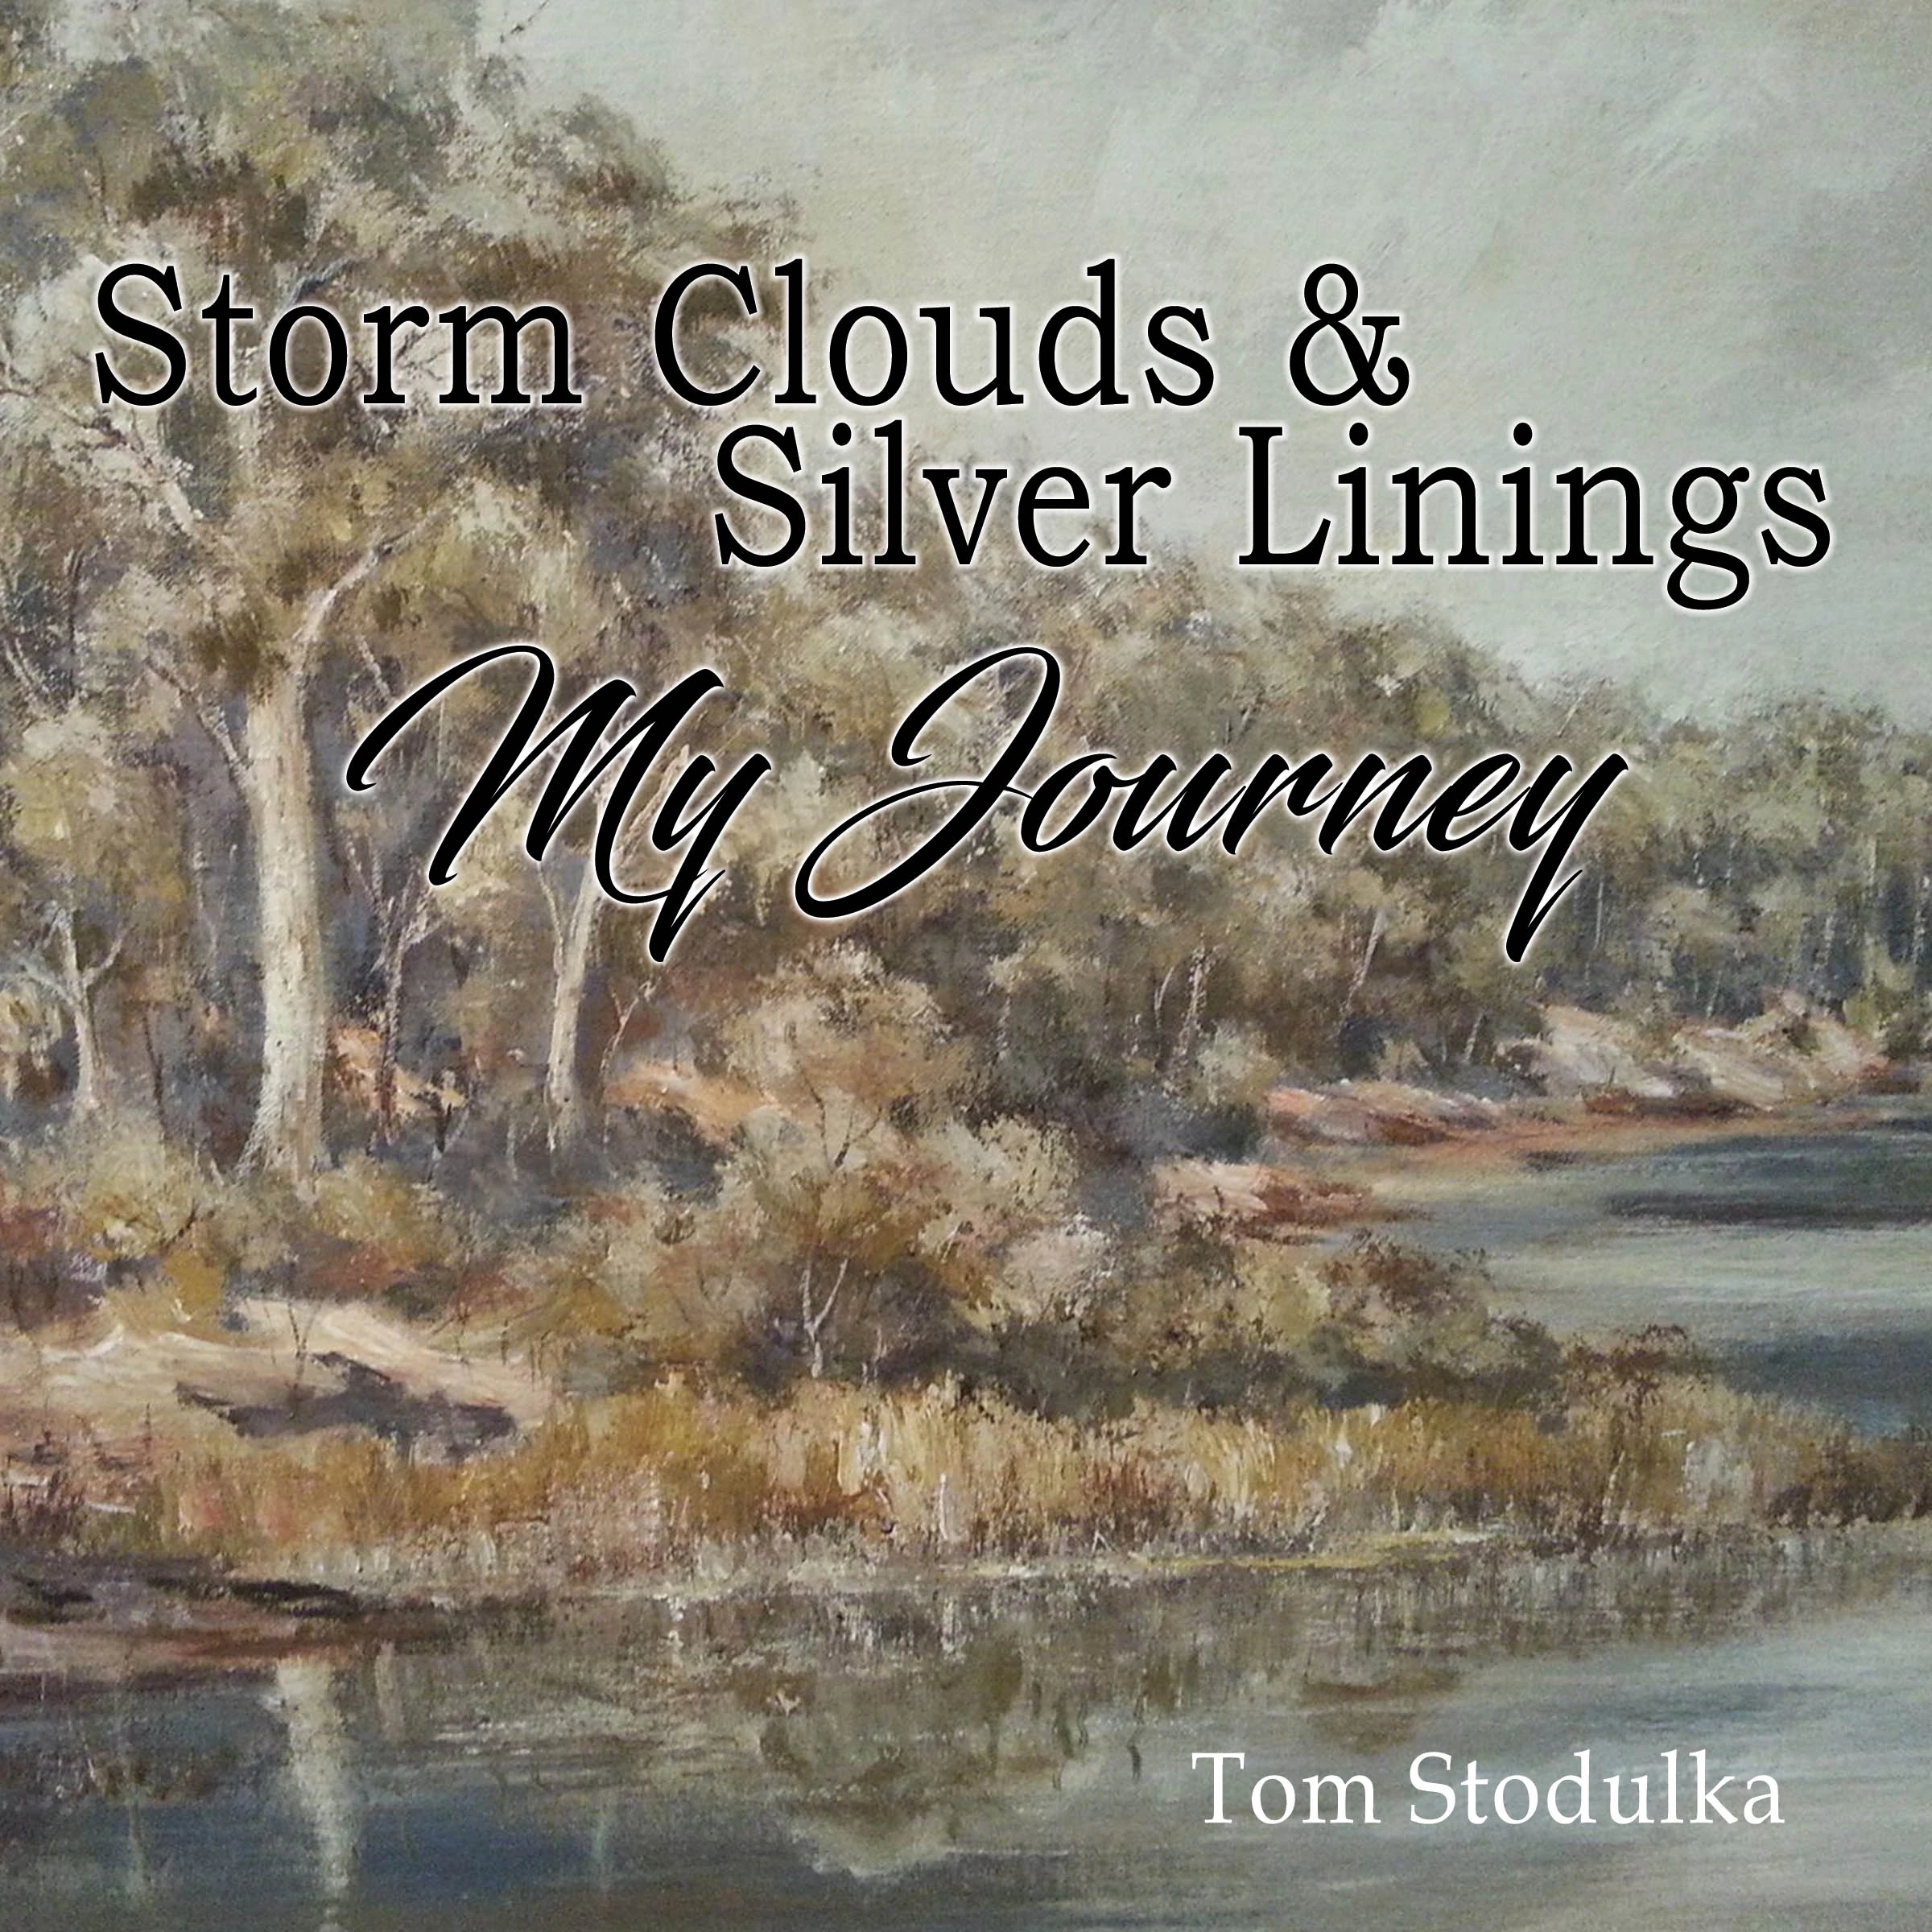 Storm Clouds & Silver Linings: My Journey Audiobook by Tom Stodulka